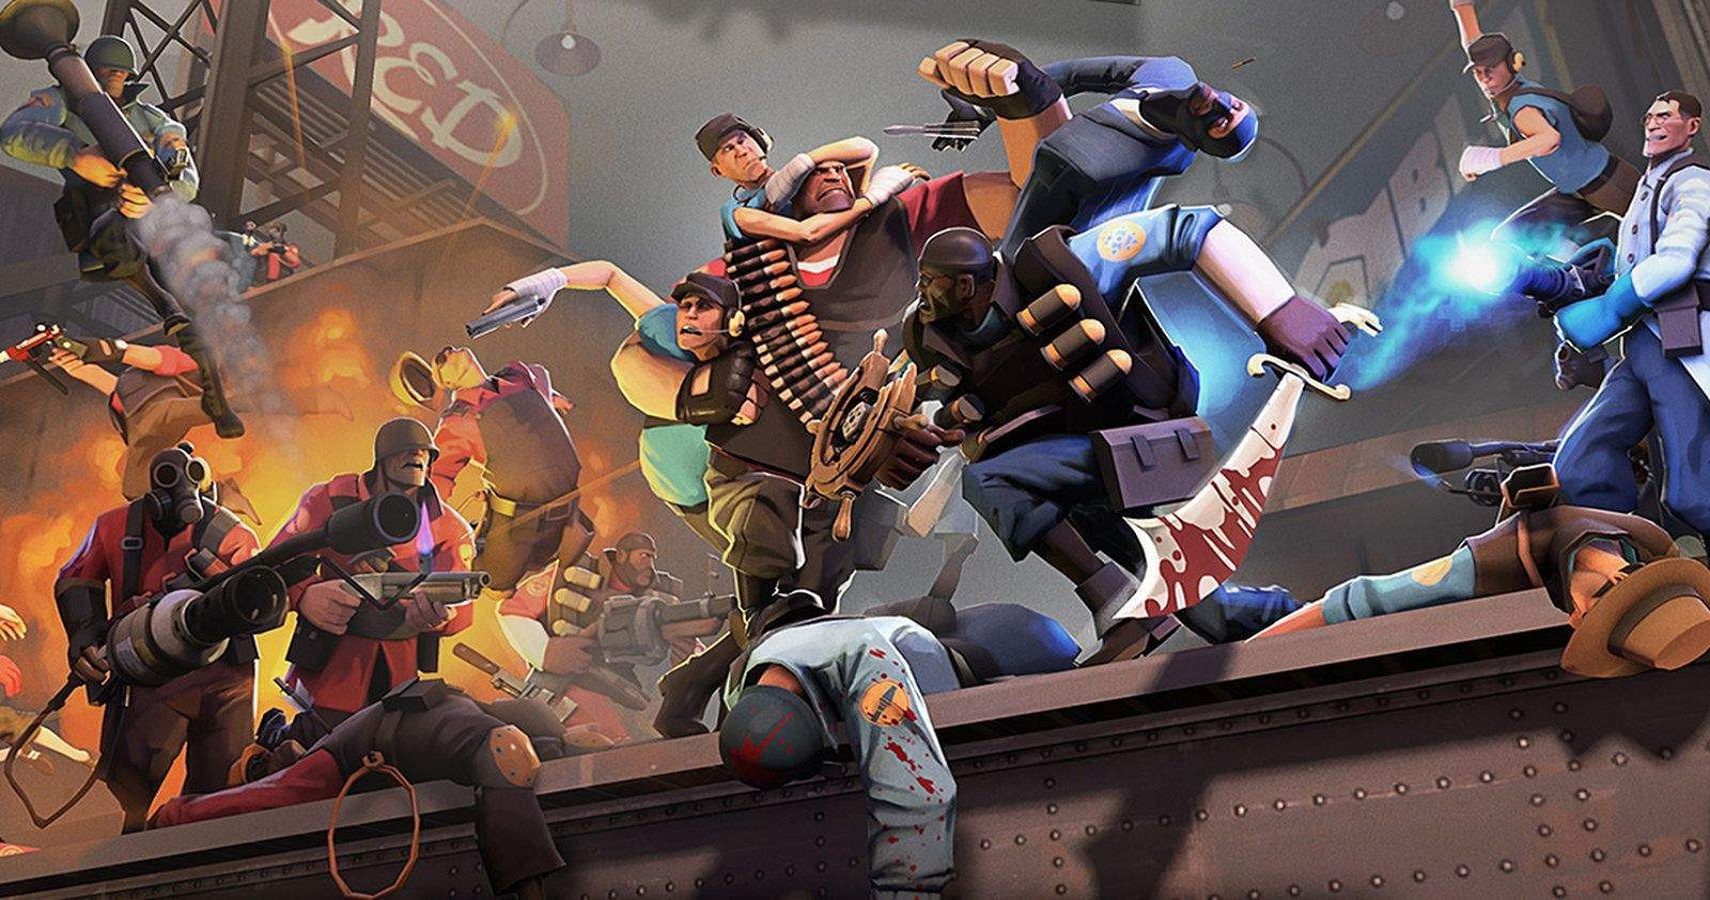 A prmo image of a battle scene from Team Fortress 2